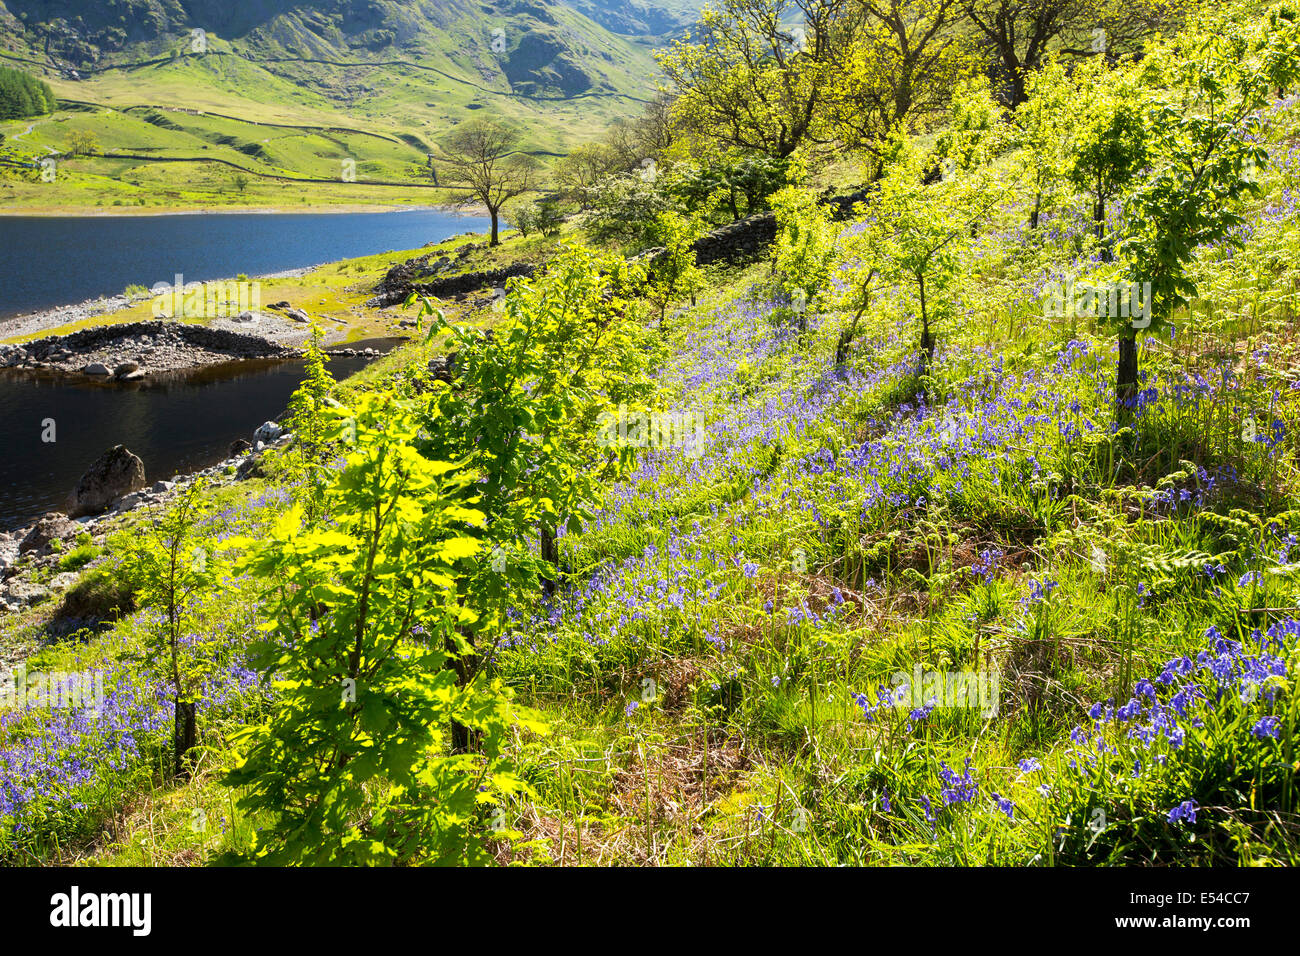 Tree planting at Haweswater, Lake District, UK, Oak trees planted as part of a habitat restoration project. Stock Photo